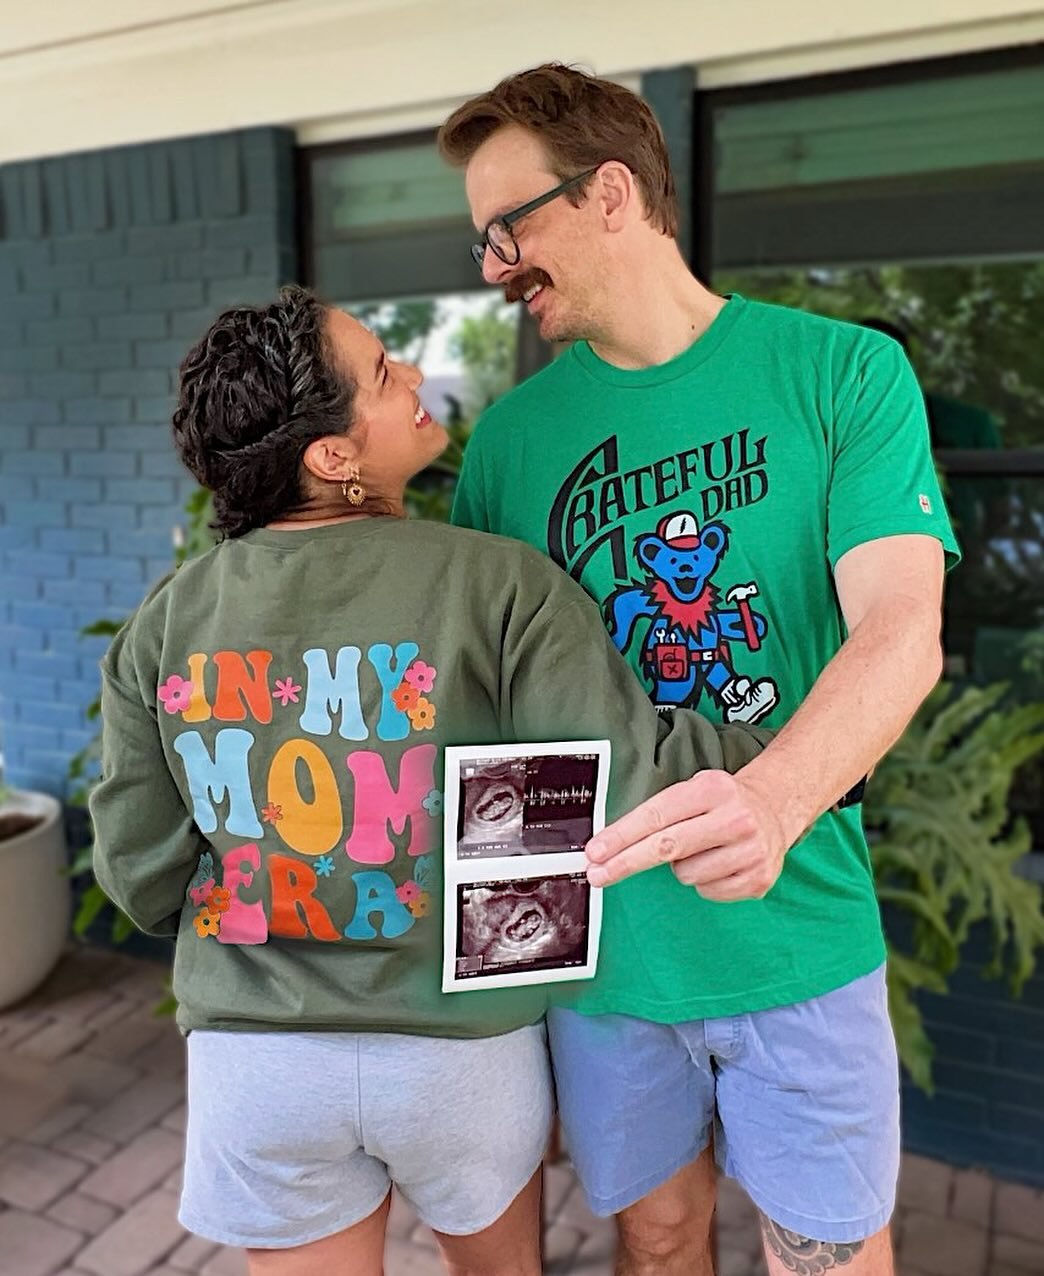 it&rsquo;s an extremely special mother&rsquo;s day over here. there are really no words to accurately depict the joy, gratitude, and frankly disbelief we feel to know that our double rainbow Baby Miller is finally here for real and will be joining us